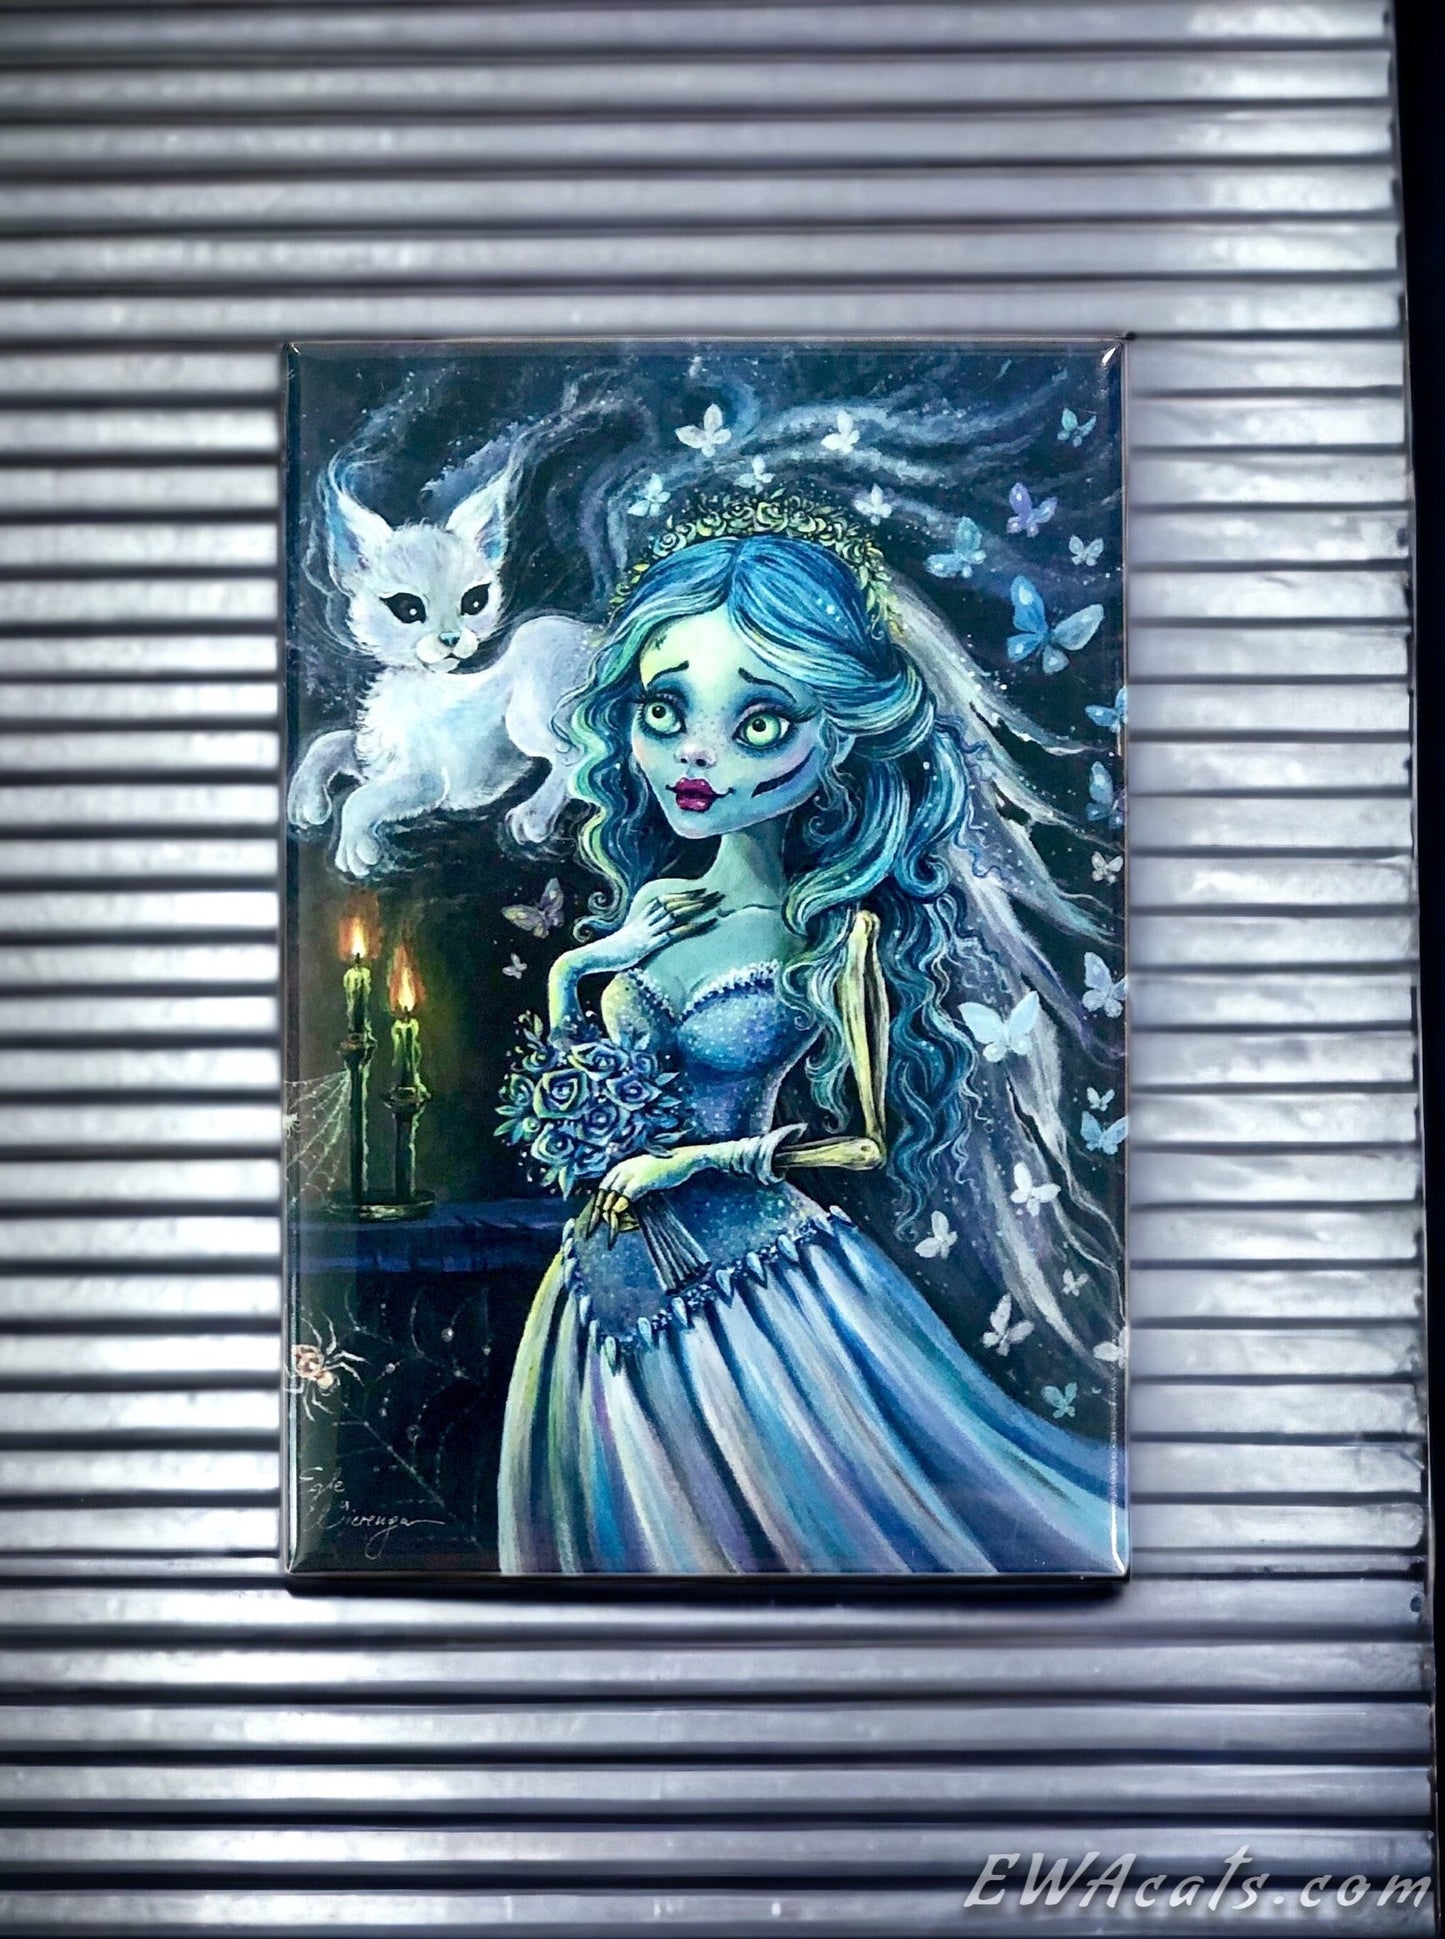 MAGNET 2"x 3" Rectangle "Emily & Her Ghost Kitty"